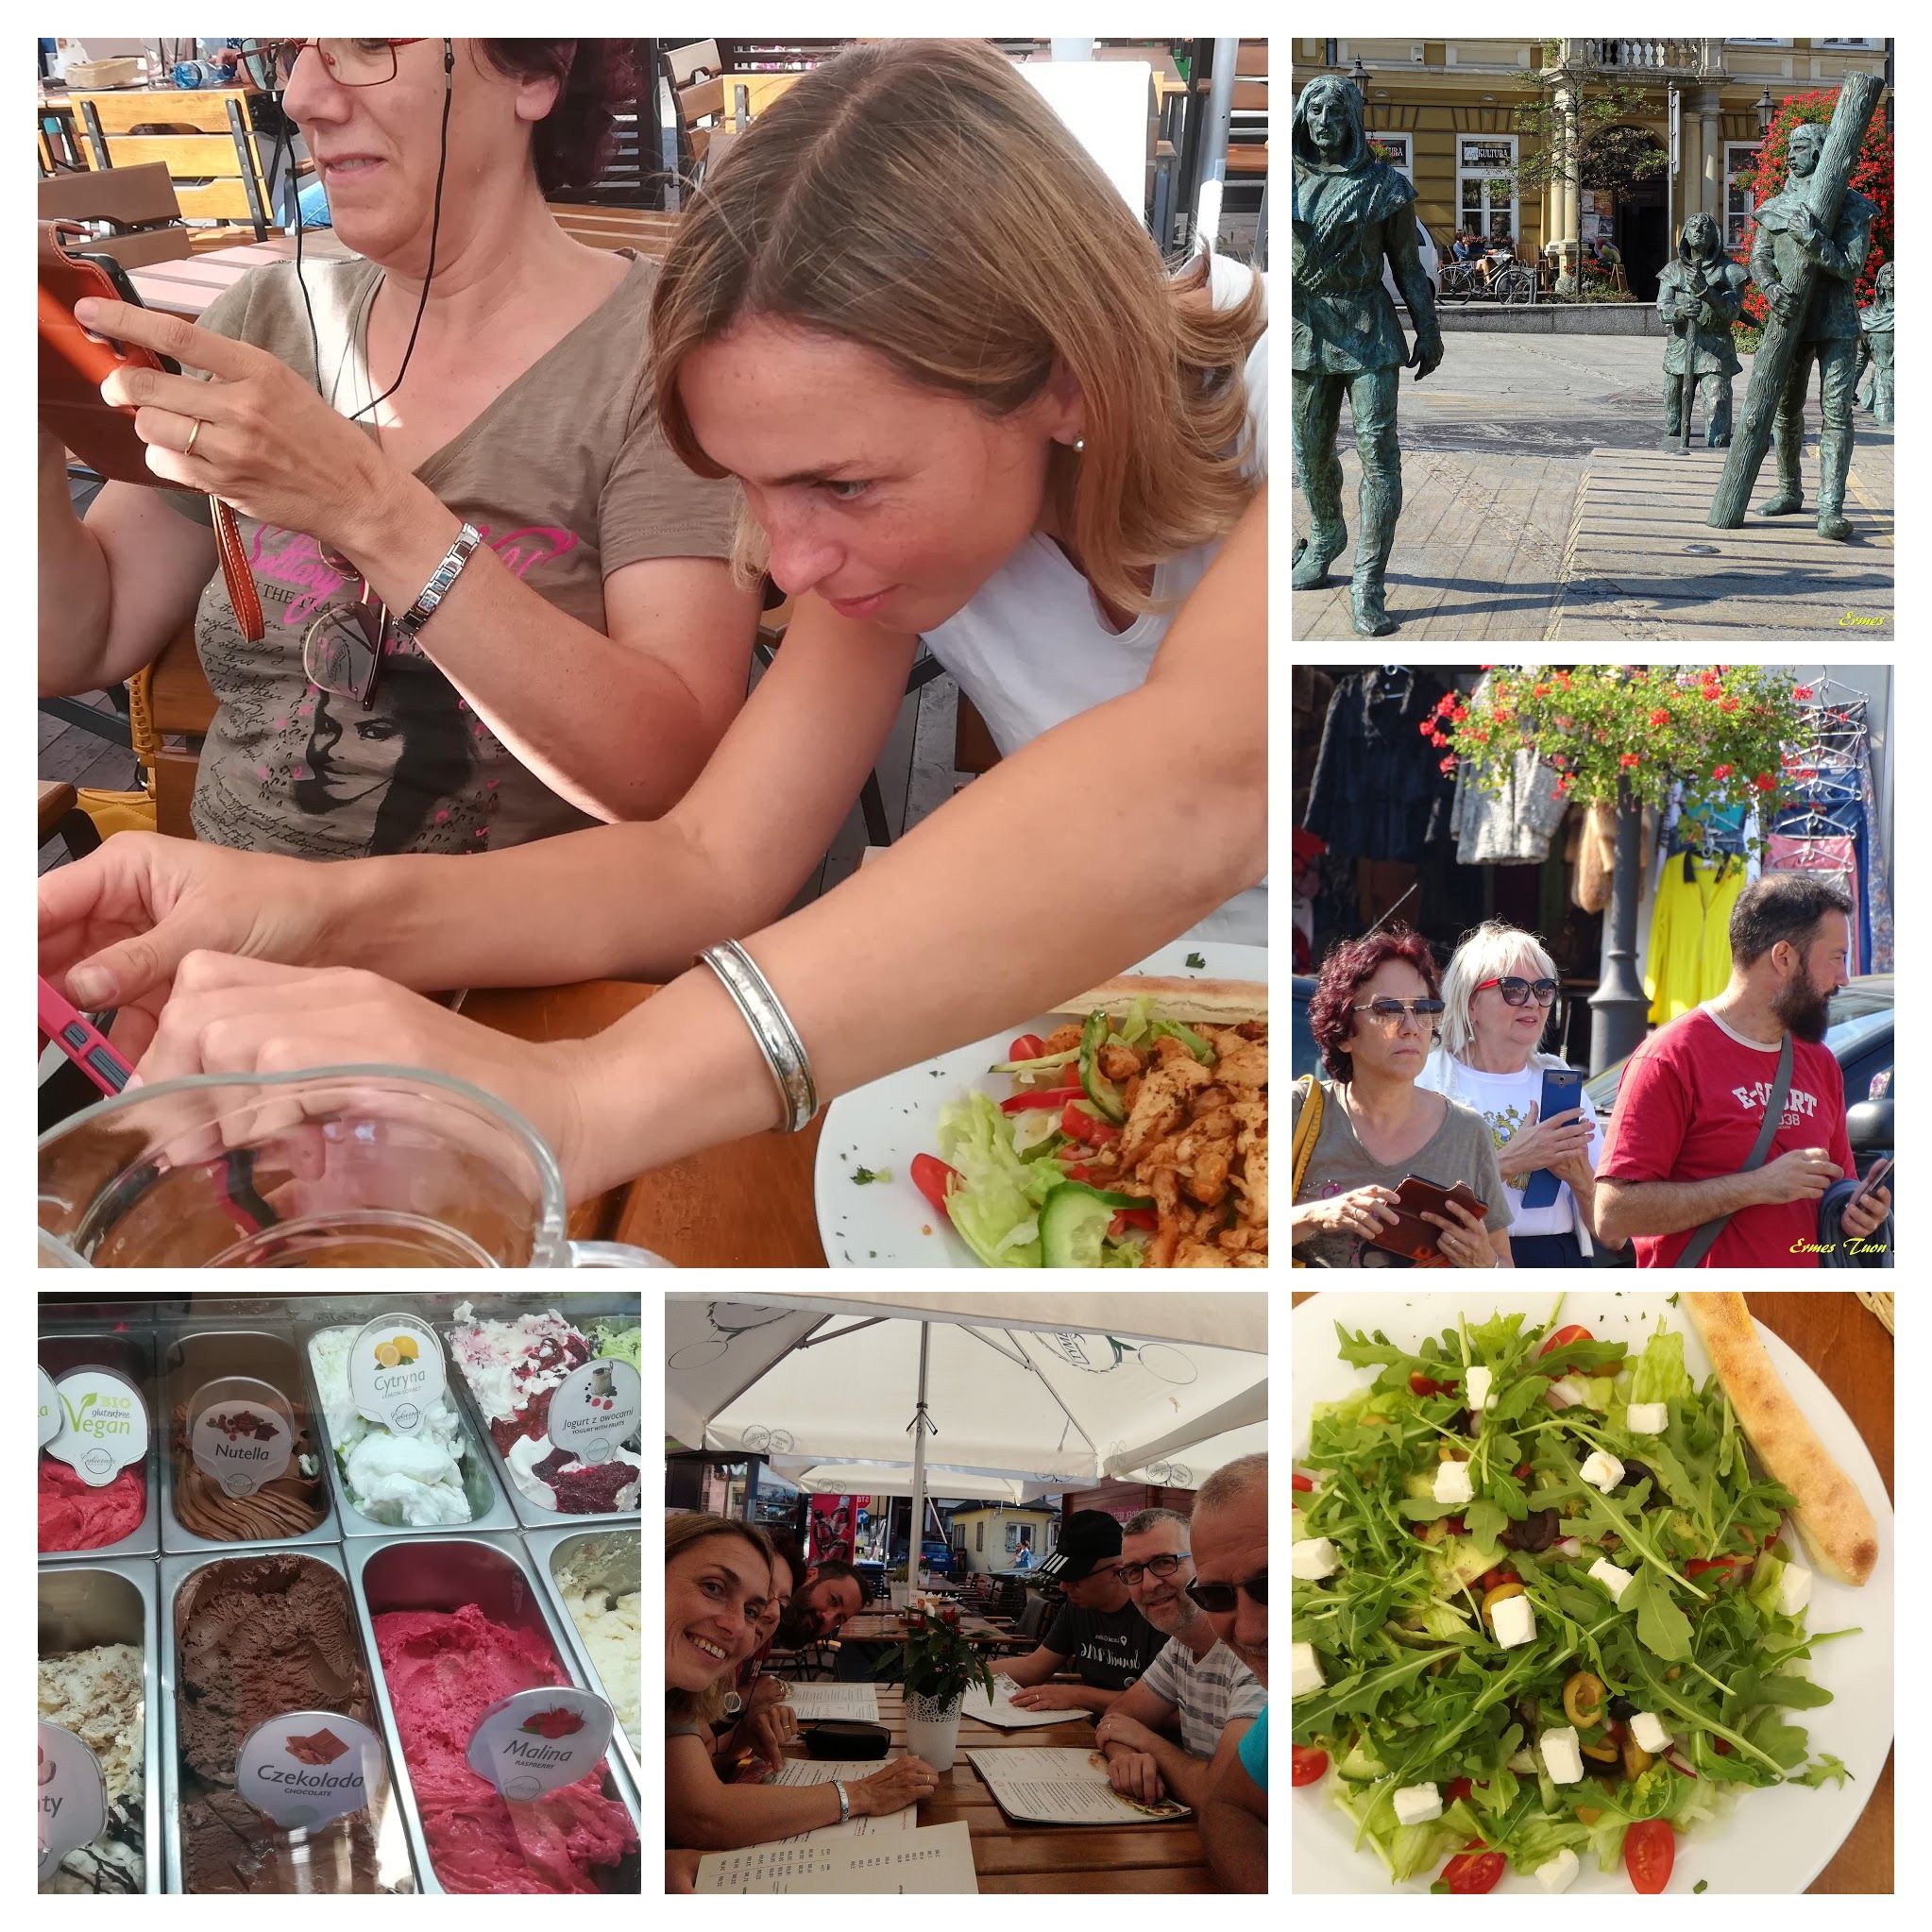 Caption: Wieliczka village - Local Guides at lunch - Photos: Local Guide @ermest